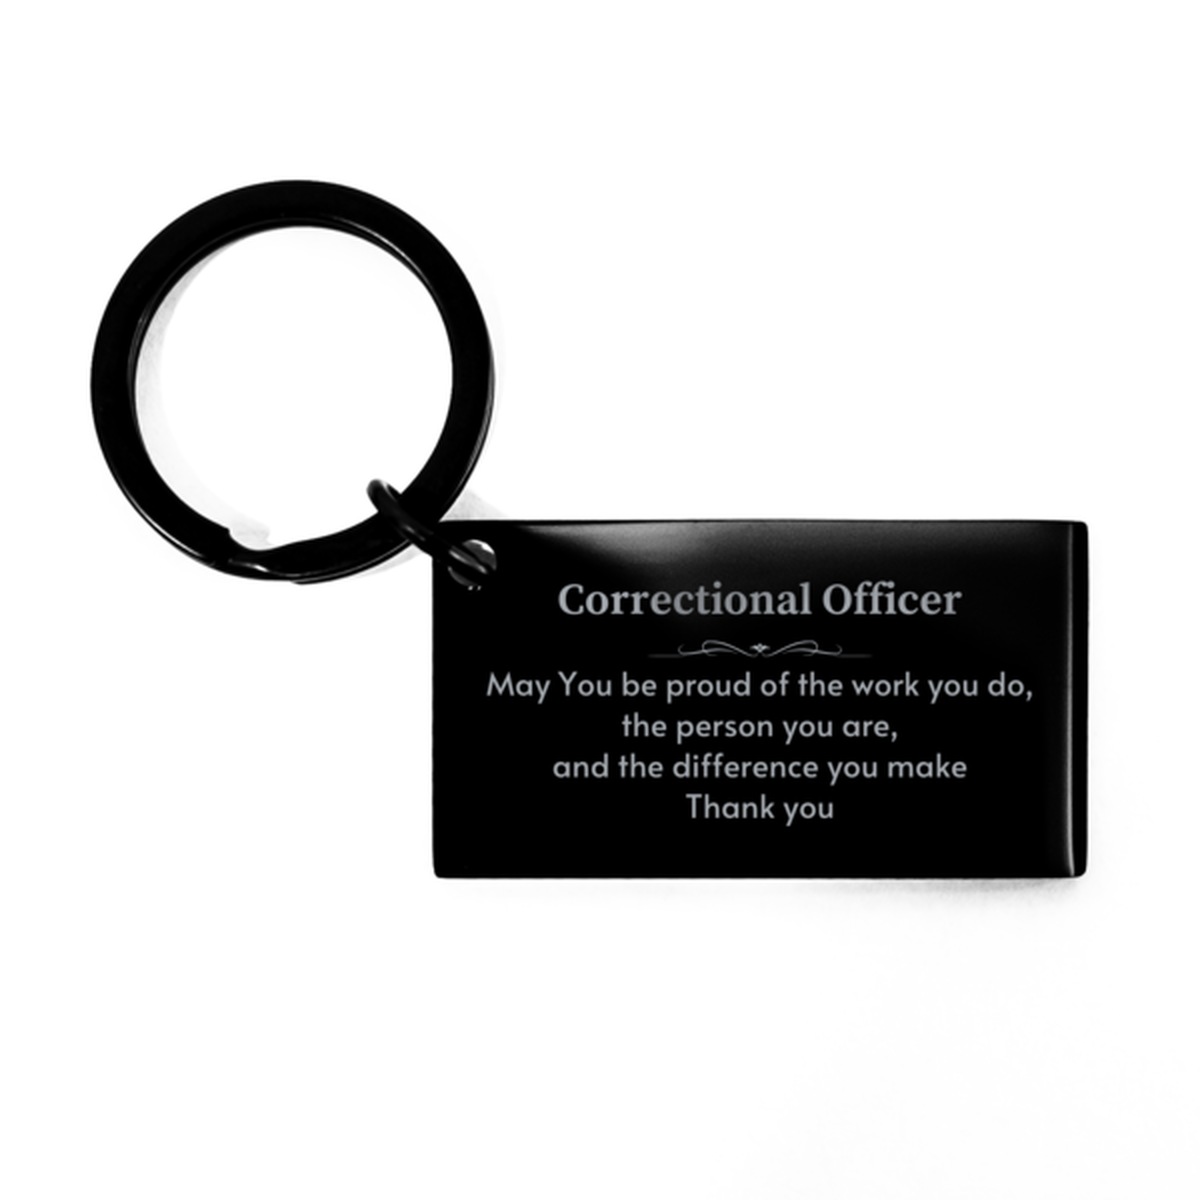 Heartwarming Keychain Retirement Coworkers Gifts for Correctional Officer, Fabricator May You be proud of the work you do, the person you are Gifts for Boss Men Women Friends